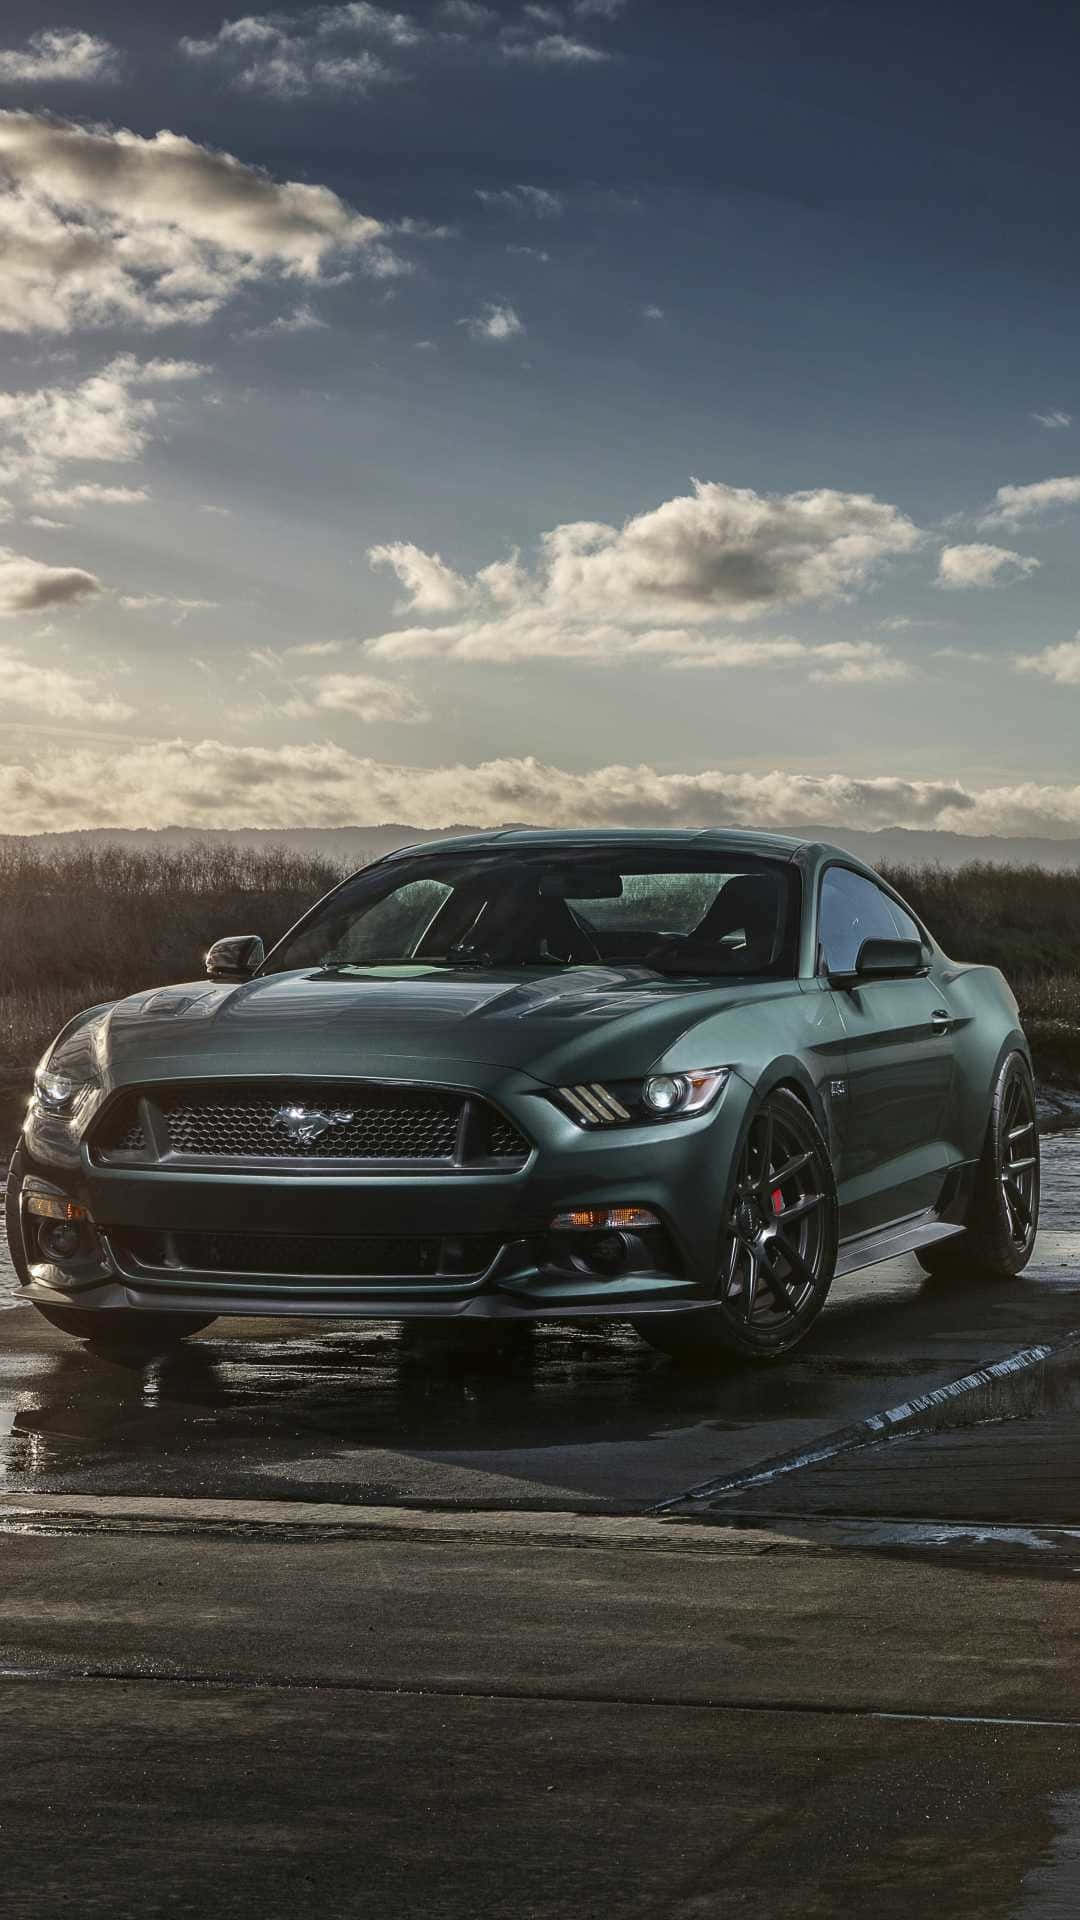 2019 Ford Mustang Sports Car After Rain Wallpaper